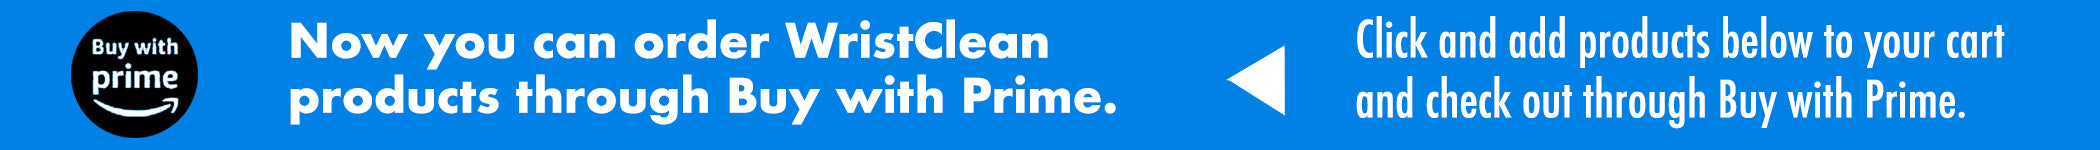 Buy with Prime Banner